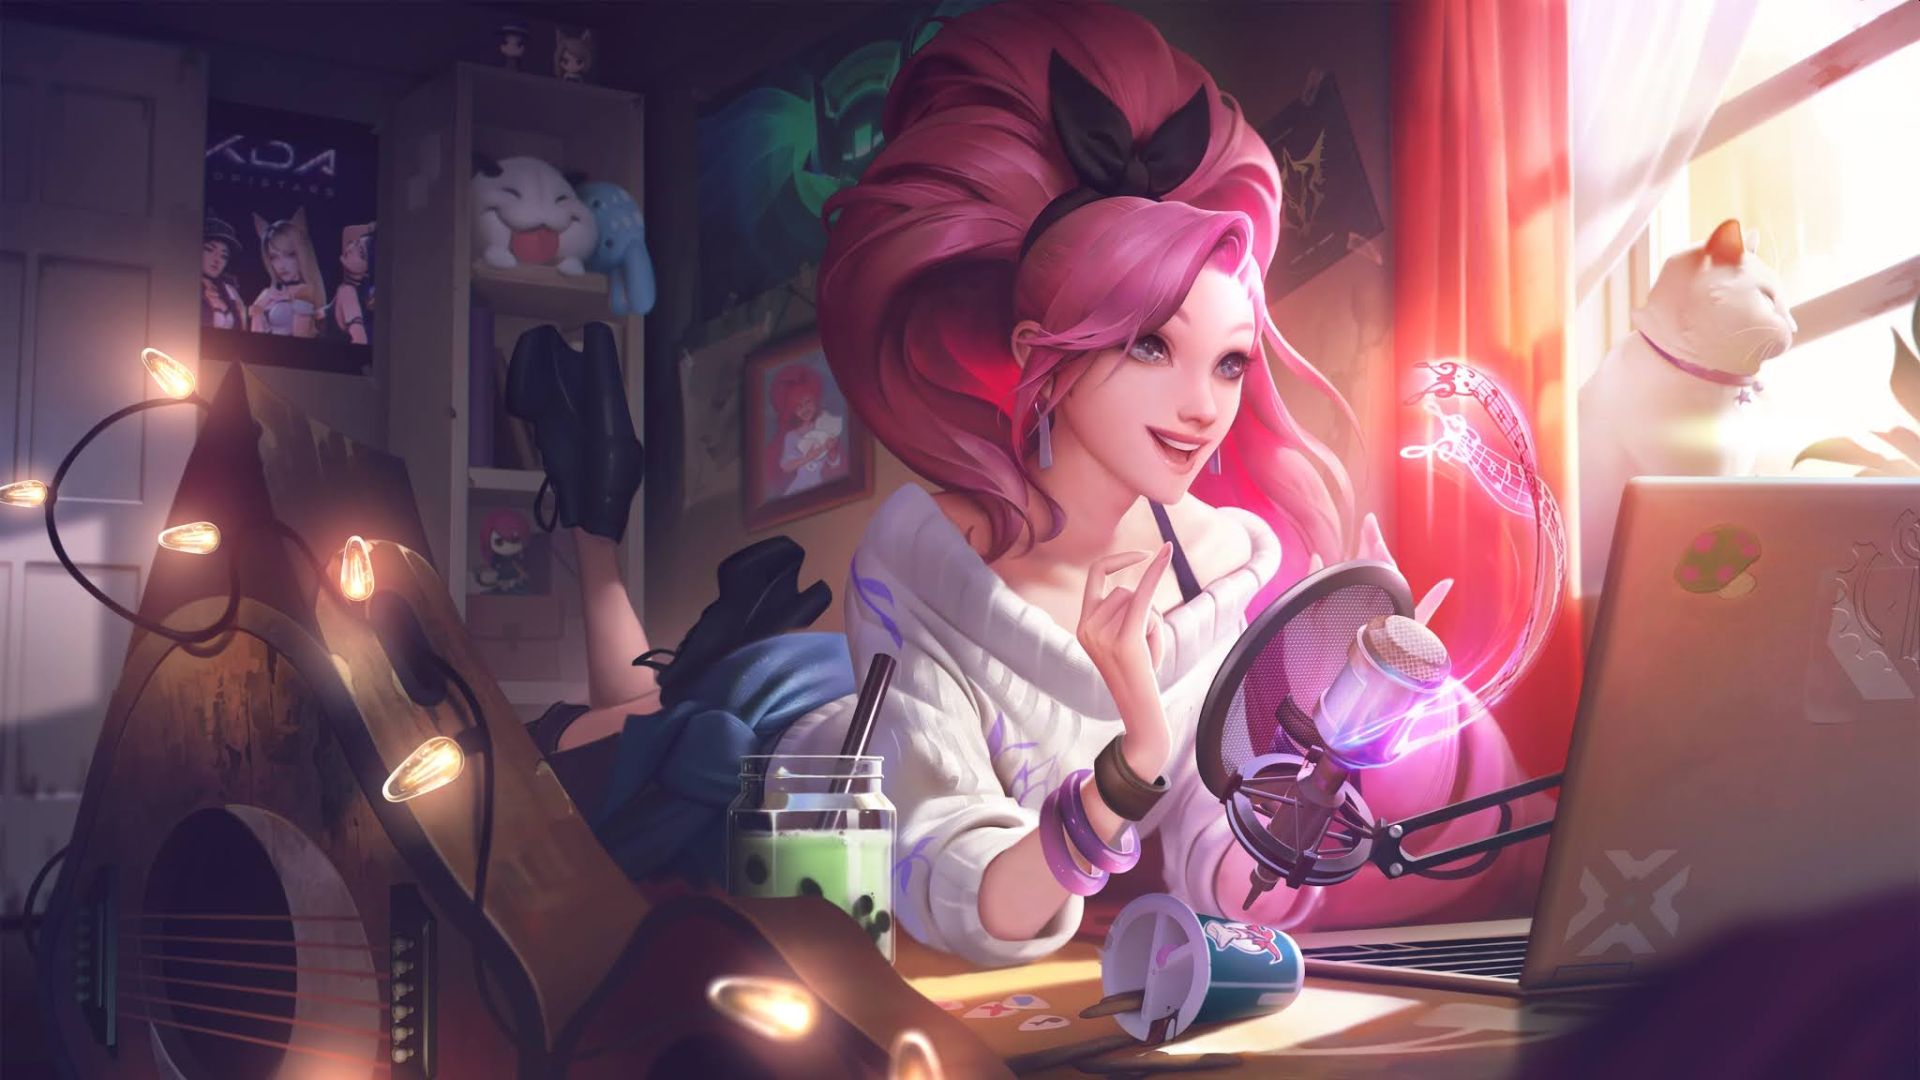 League Of Legends Developer Answered To Criticism Regarding Seraphine’s Kit, Said To Try Her Out First